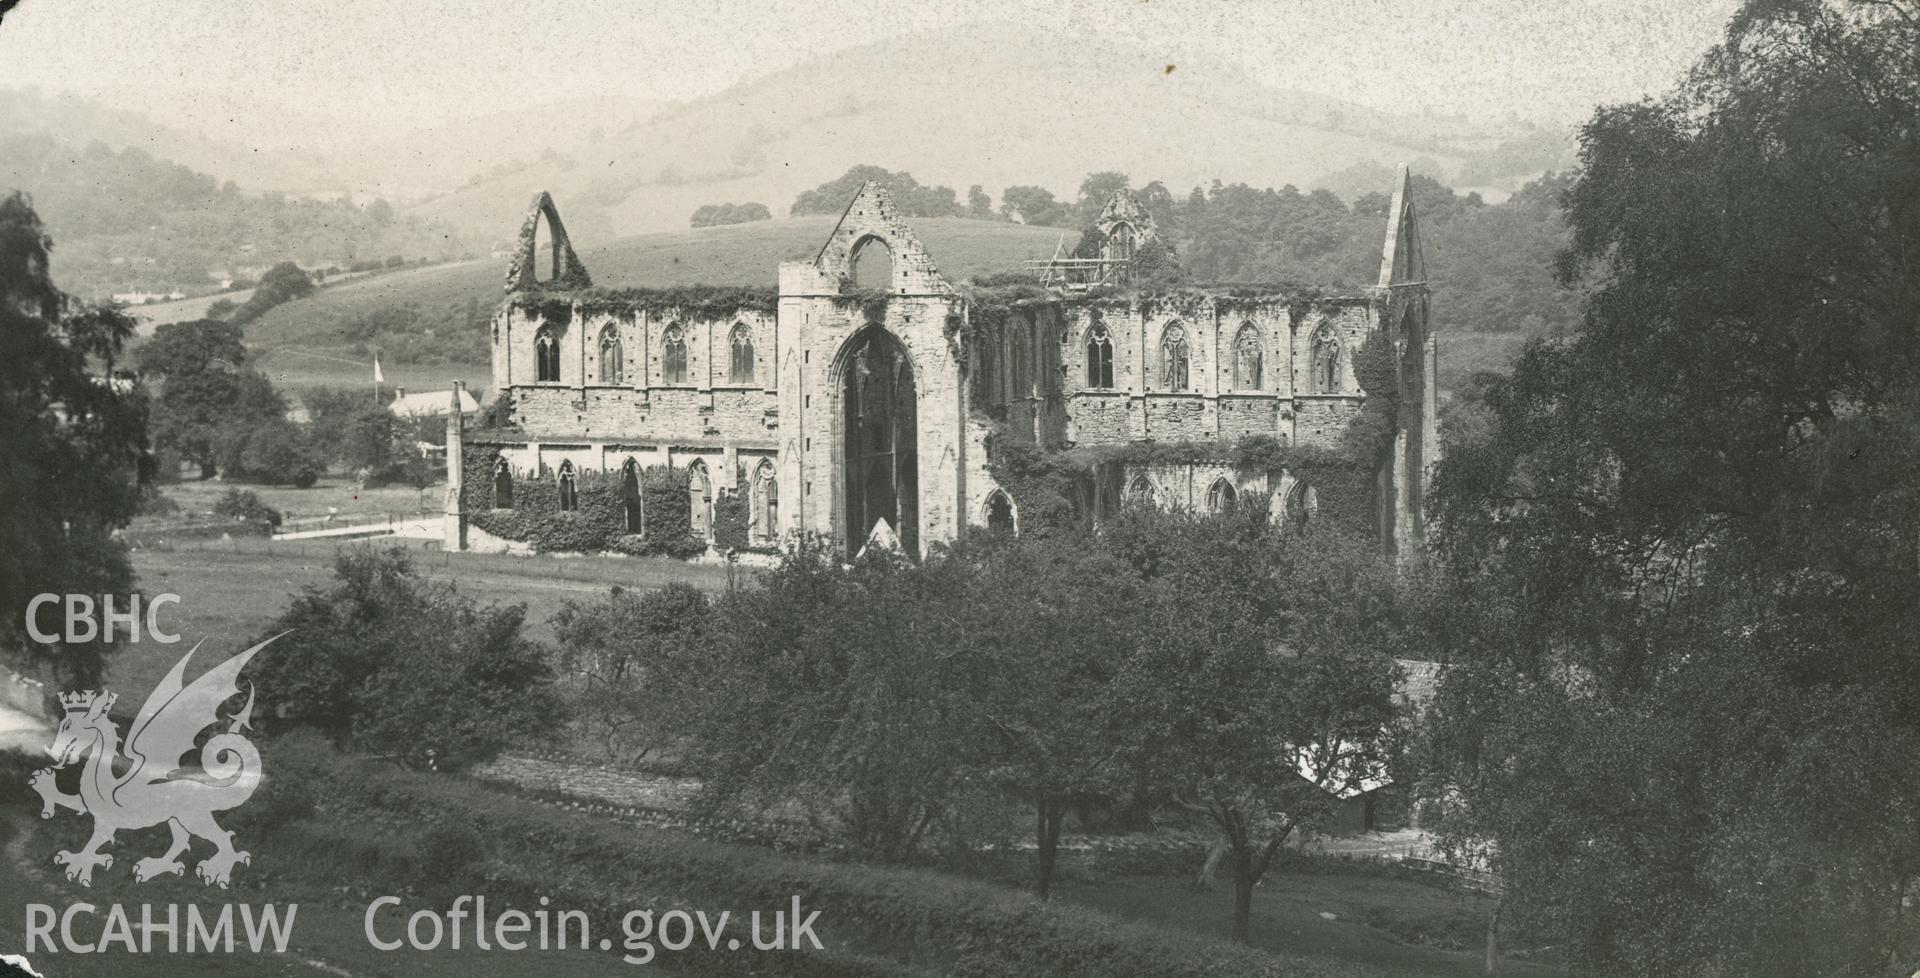 Digital copy of a landscape view of Tintern Abbey by T Coysh c1953.